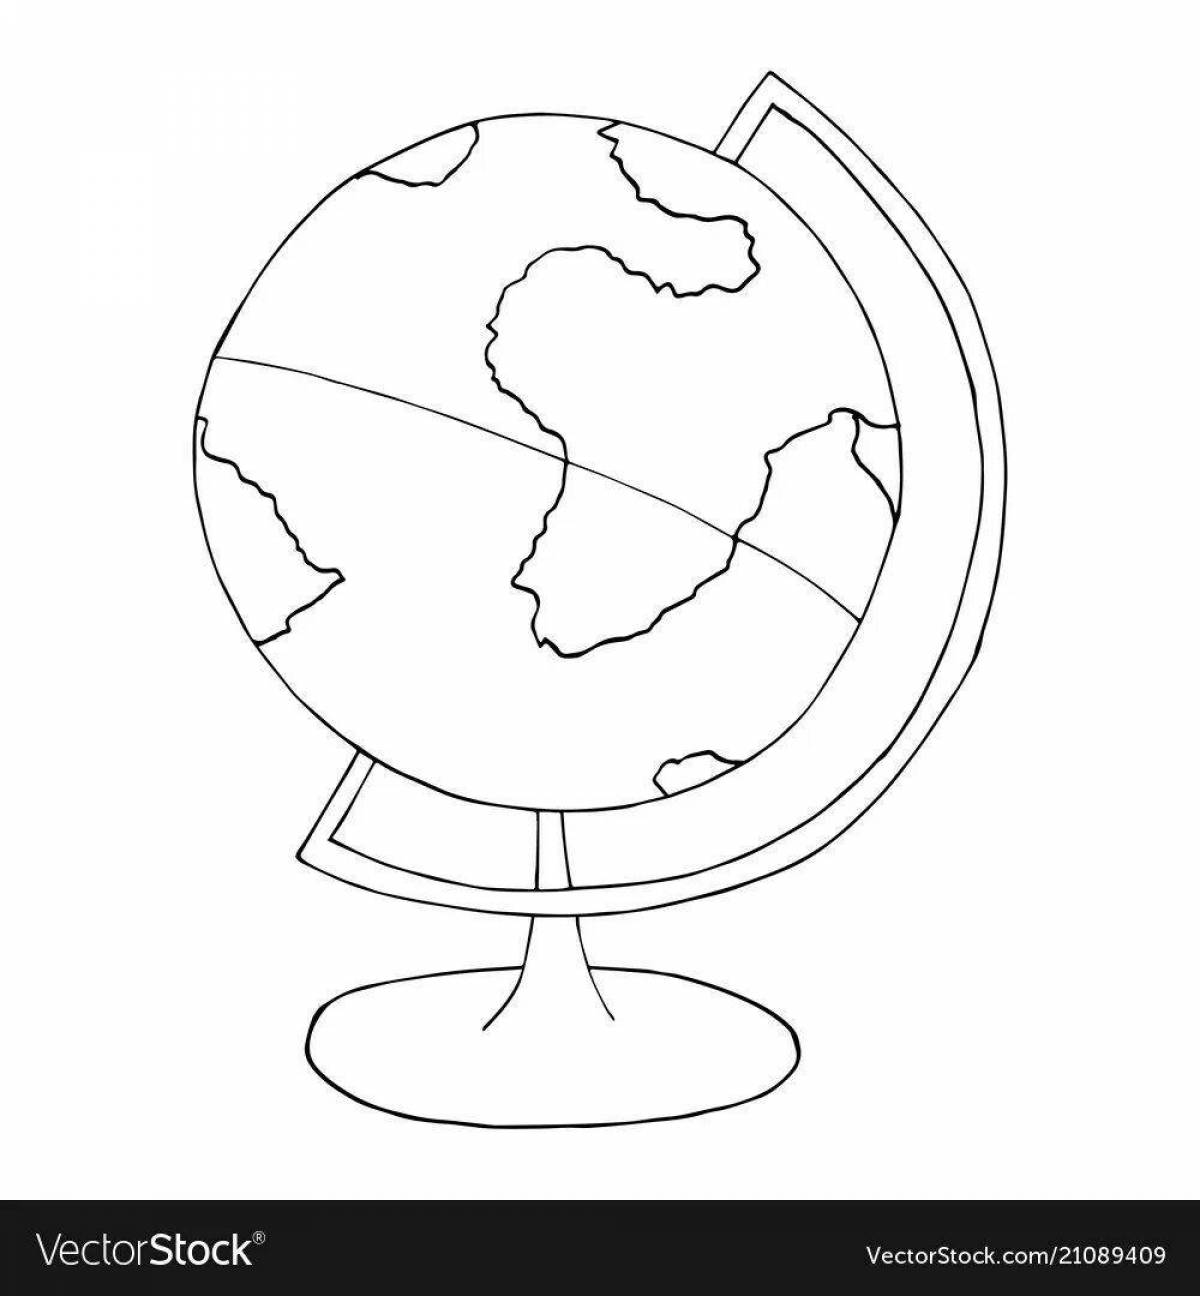 Colorful equator coloring page